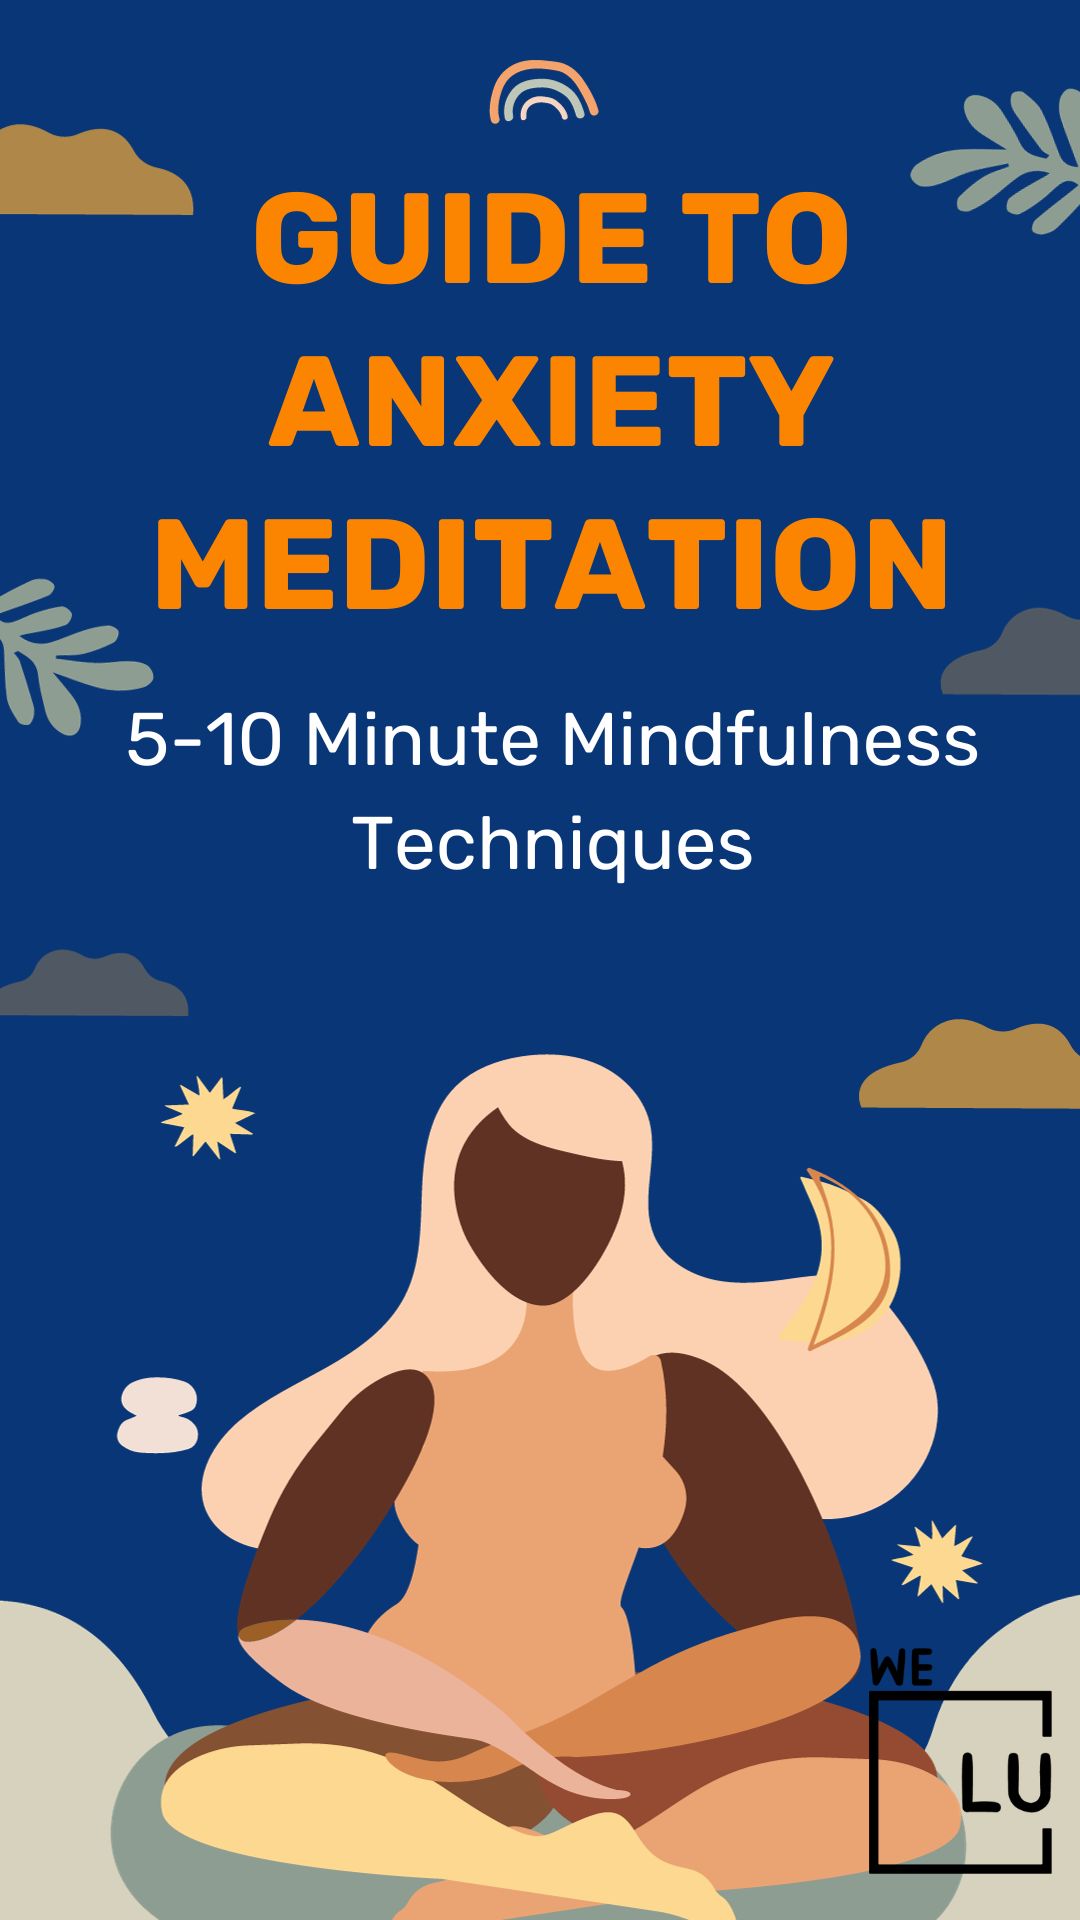 Guide to Anxiety Meditation banner